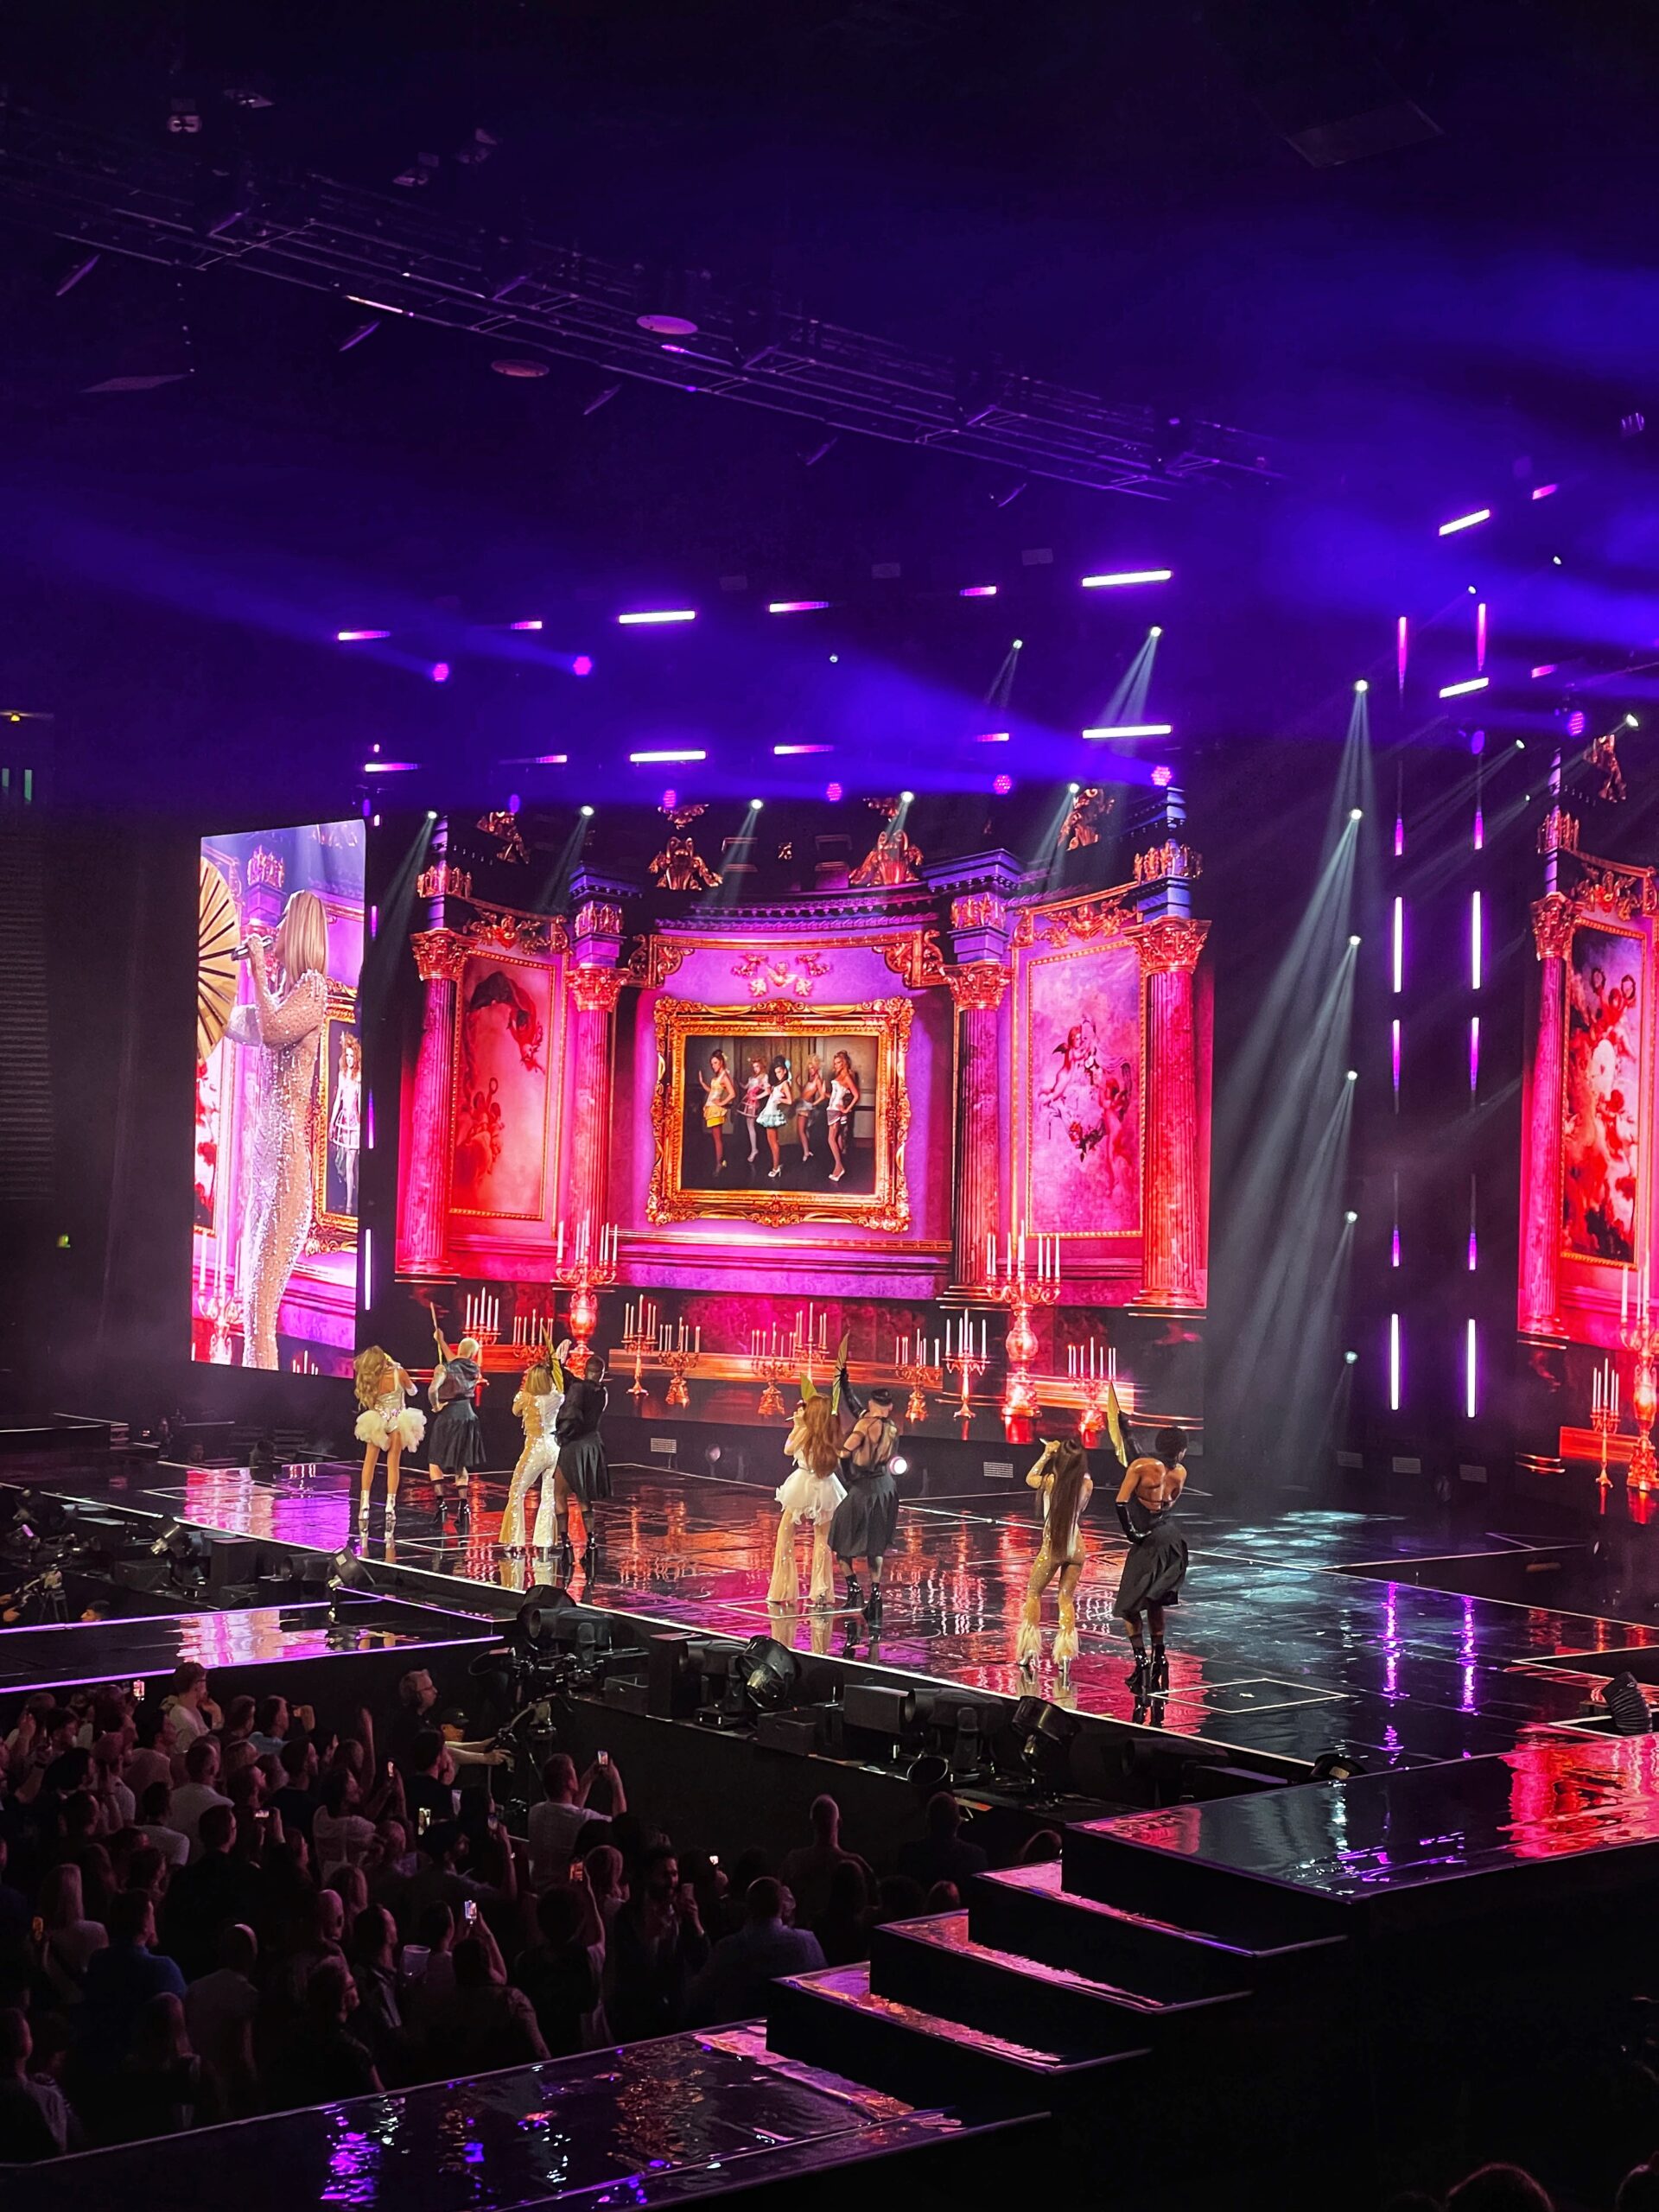 Girls Aloud performing at the AO Arena in Manchester. Credit: The Manc Group